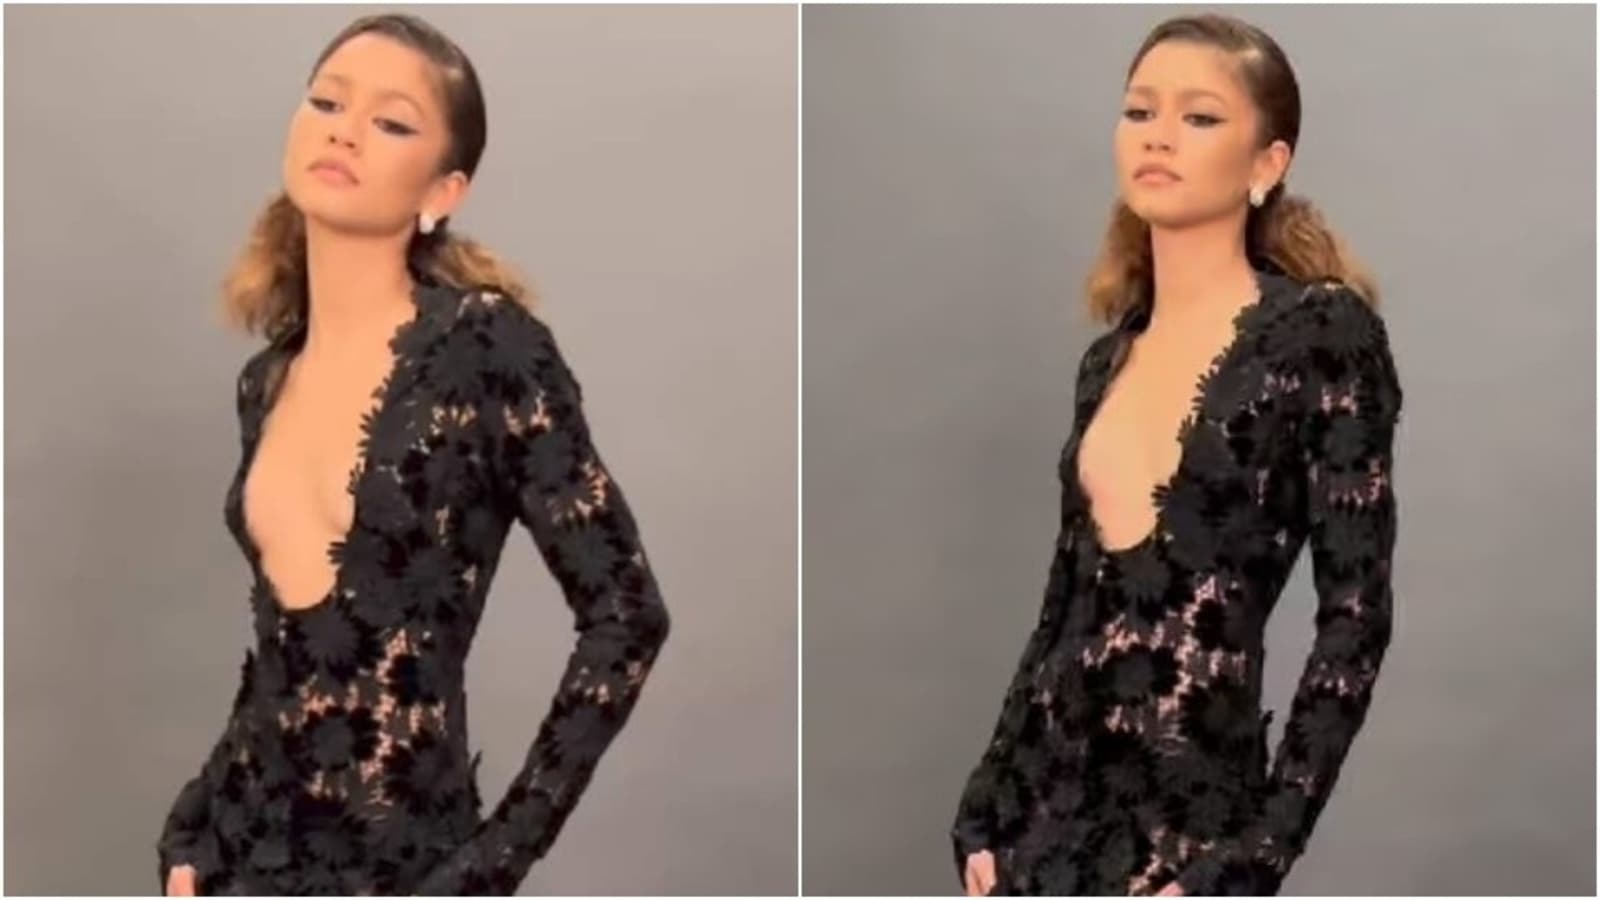 Zendaya in black see-through dress looks bewitching in pre-Oscars video, her stylist asks ‘ready for tomorrow?’: Watch